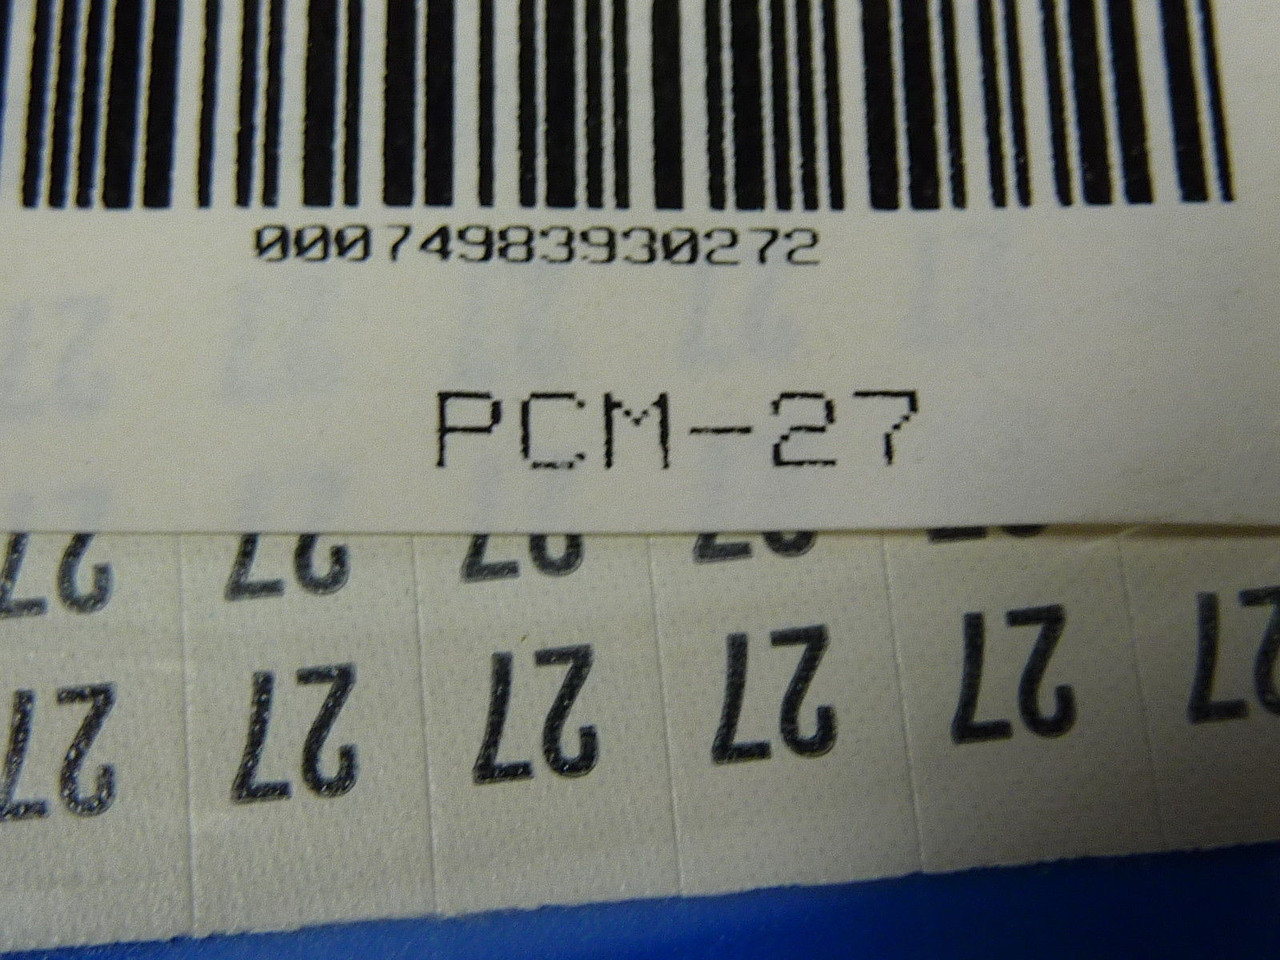 Panduit PCM-27 Vinyl Cloth Wire Marker Card '27' Lot of 5 Sheets ! NEW !